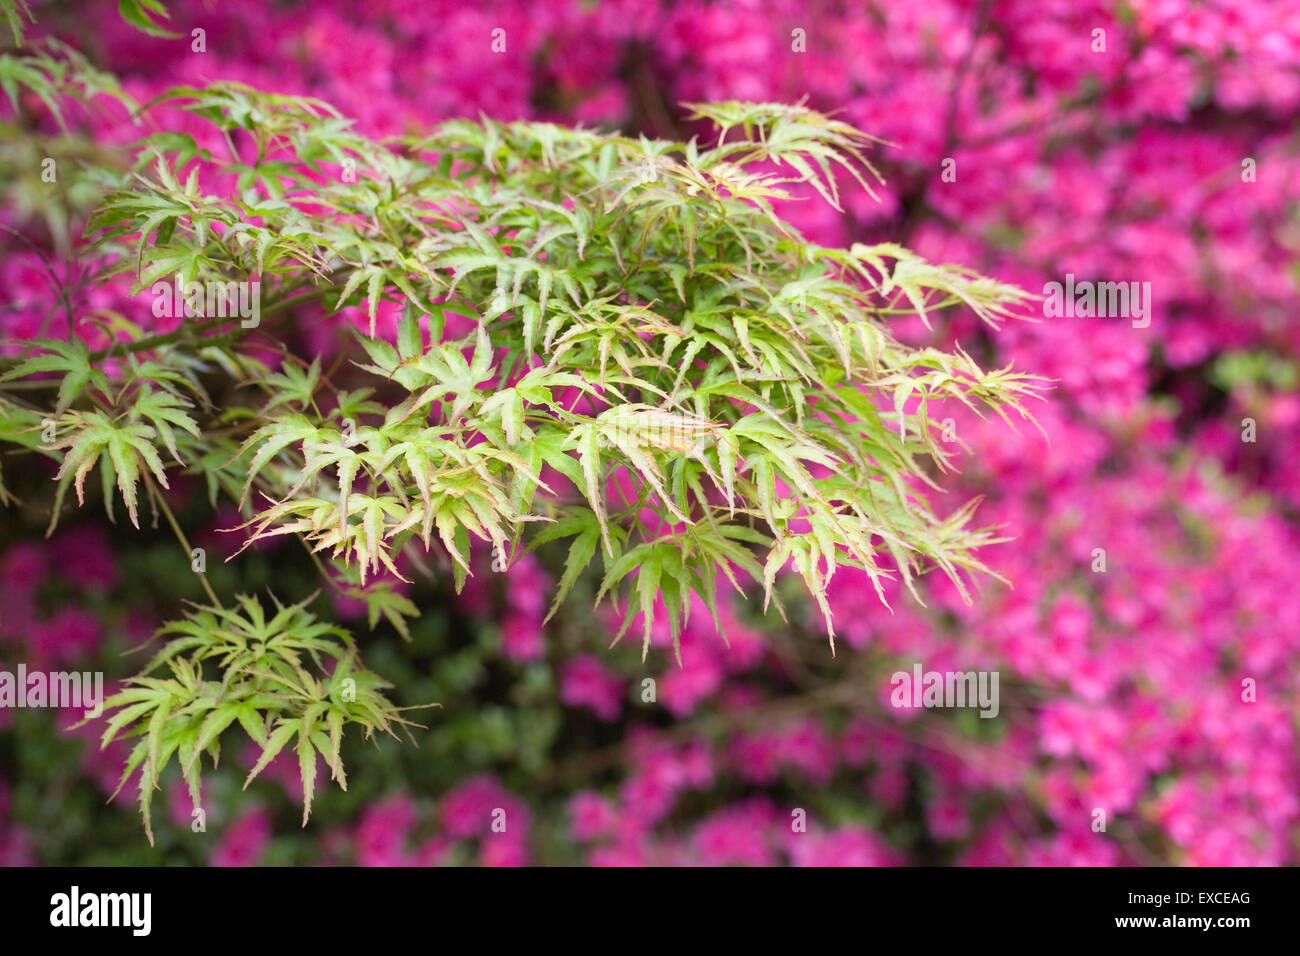 Acer palmatum 'Kamagata' in front of Rhododendron Amoenum. Stock Photo